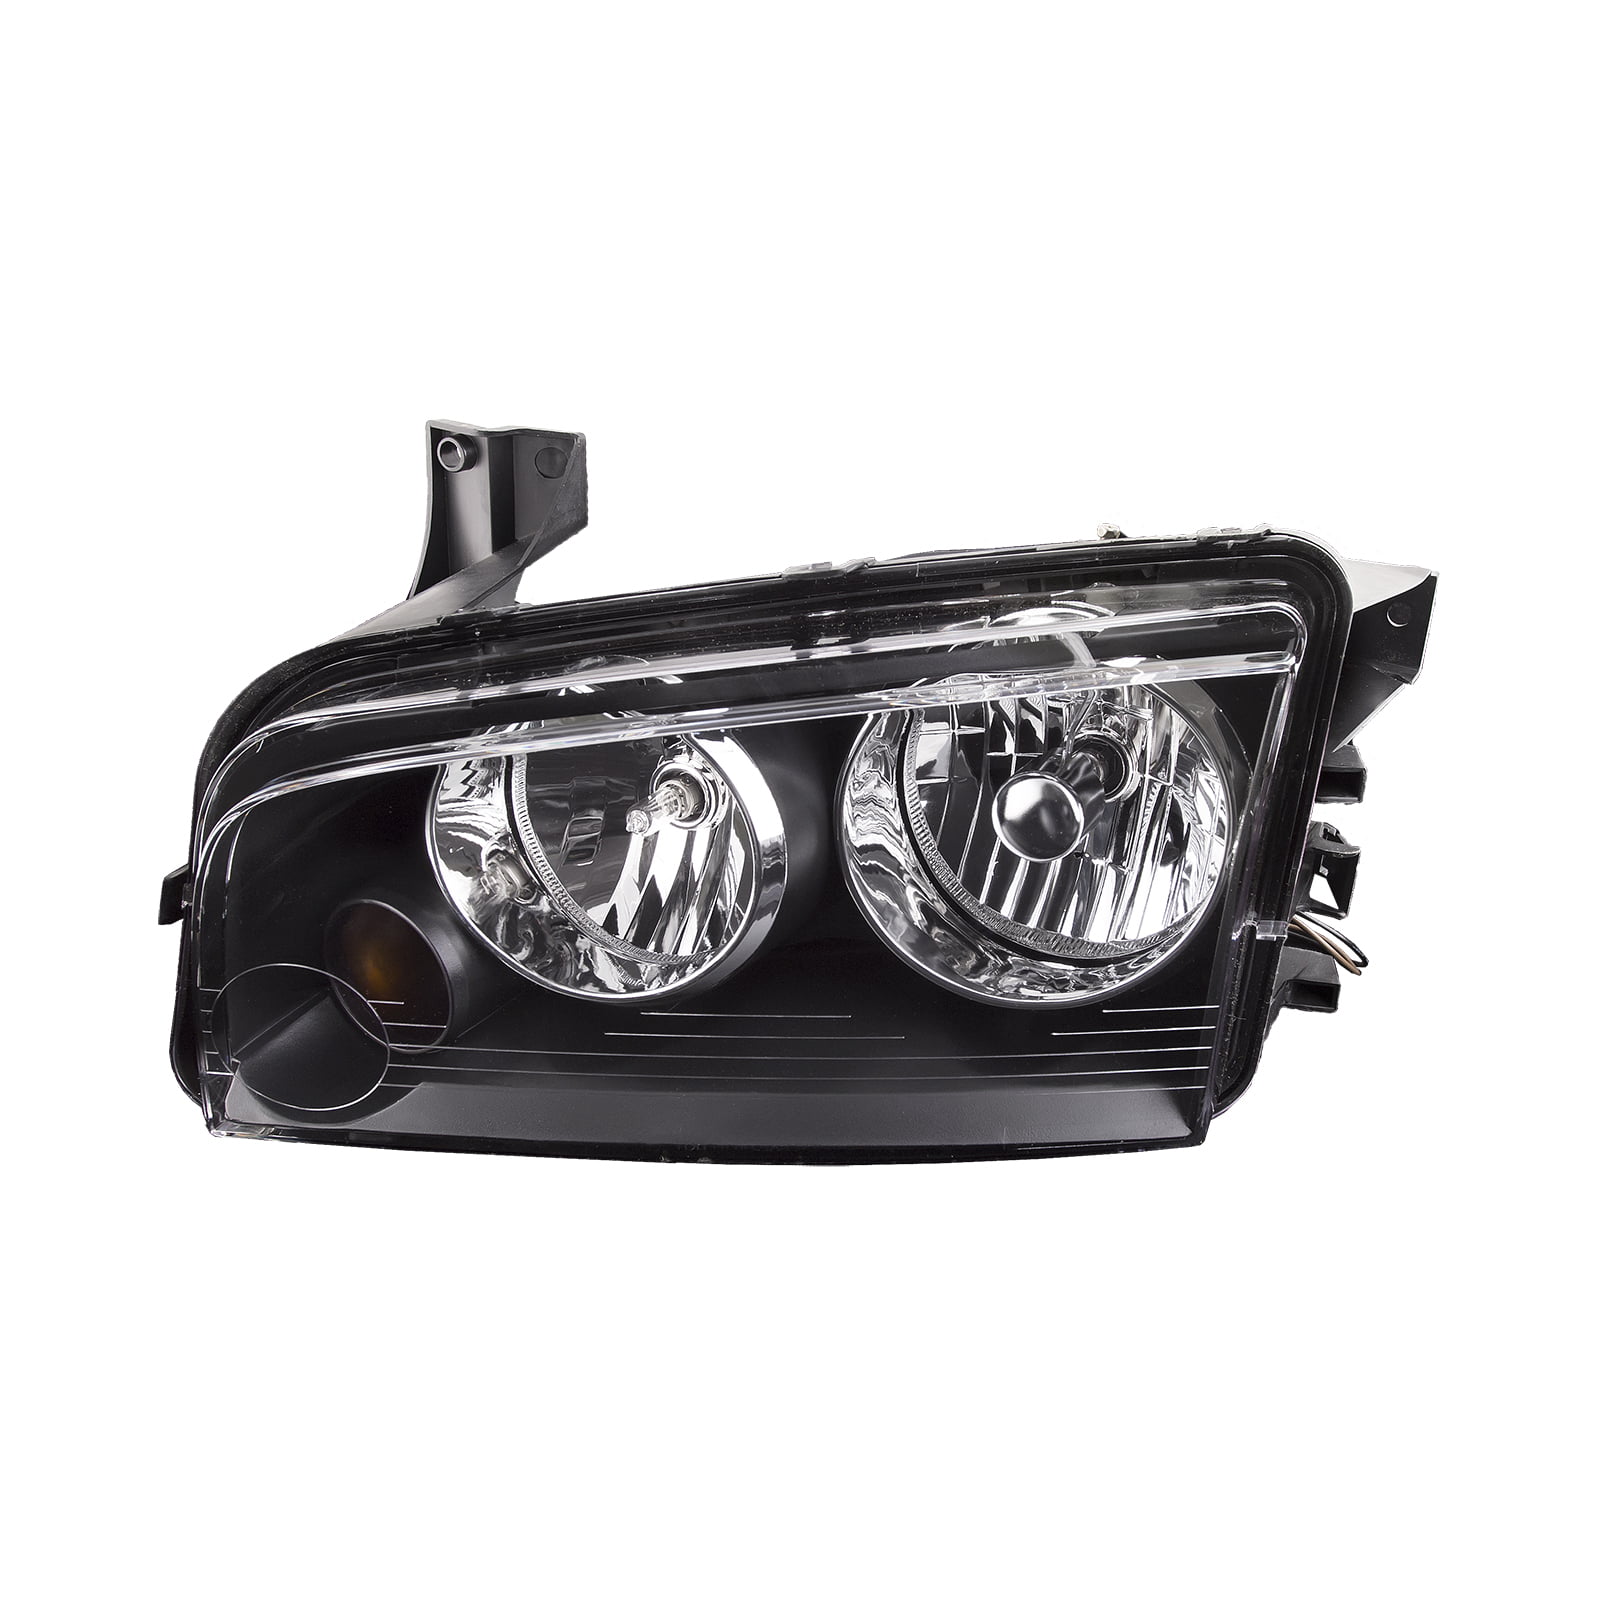 Details about   FOR 06-10 DODGE CHARGER CRYSTAL BLACK HEADLIGHTS LAMP W/BUMPER DRL LED+XENON HID